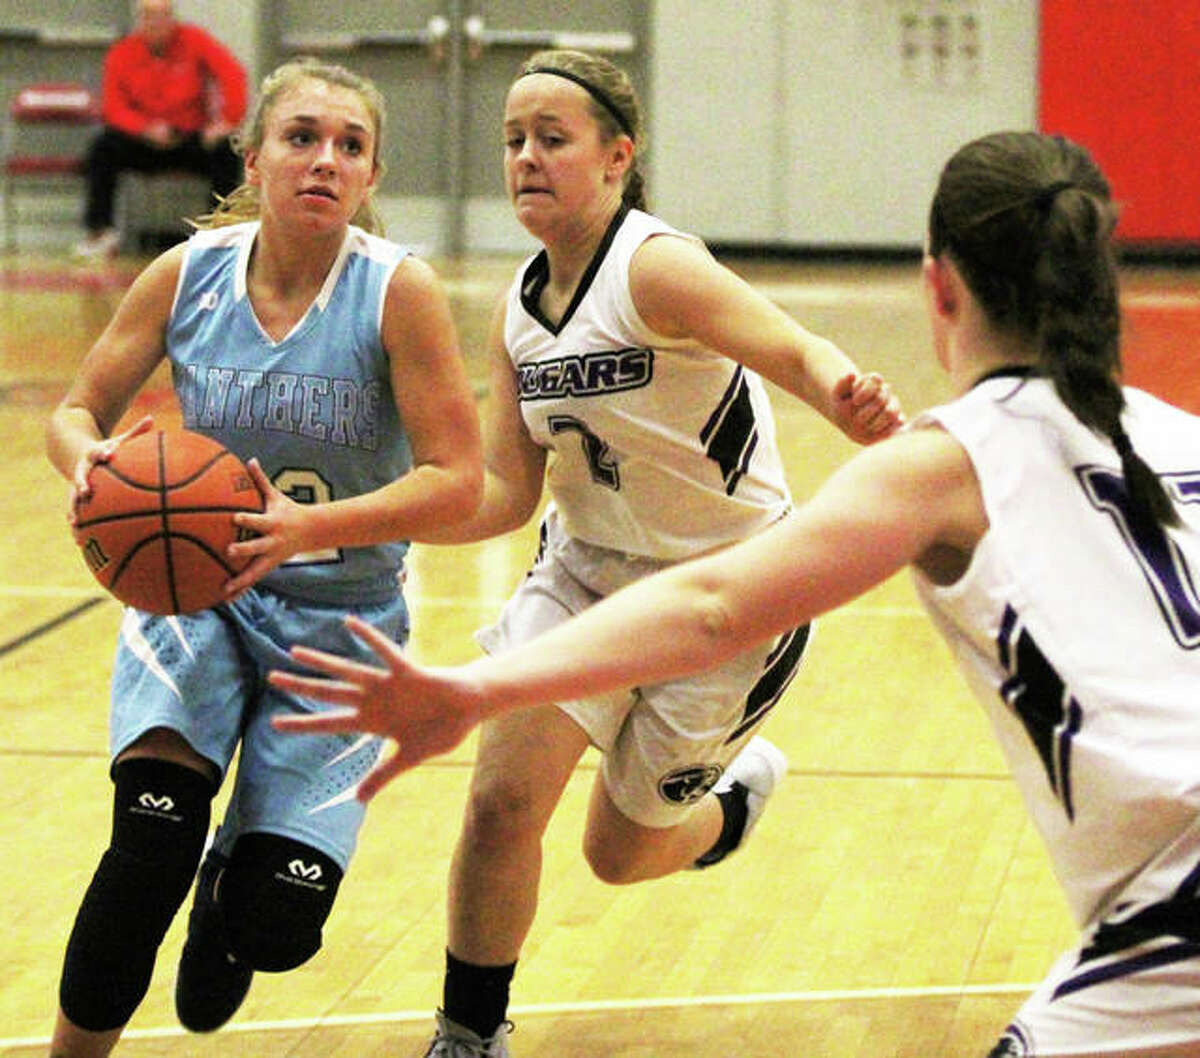 Jersey’s Clare Breden (left) drives past Breese Central’s MiKayla Becker (middle) while another Cougar defends the rim during the Panthers overtime victory Tuesday at the Alton Tourney. Breden led all scorers with 21 points.